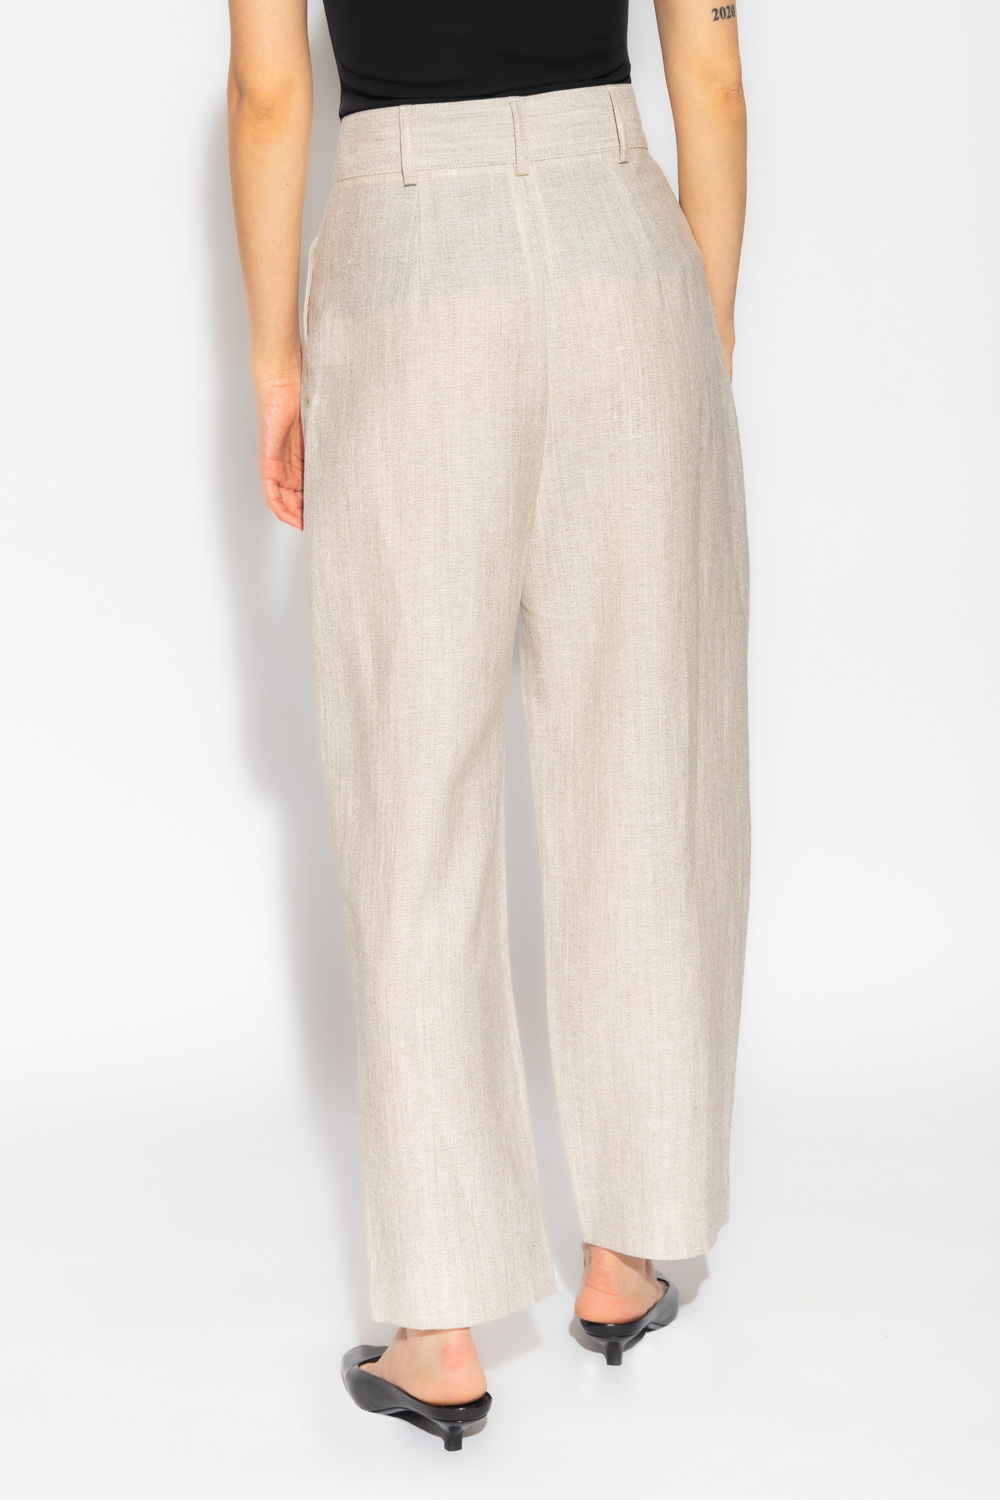 TOTEME Wool trousers